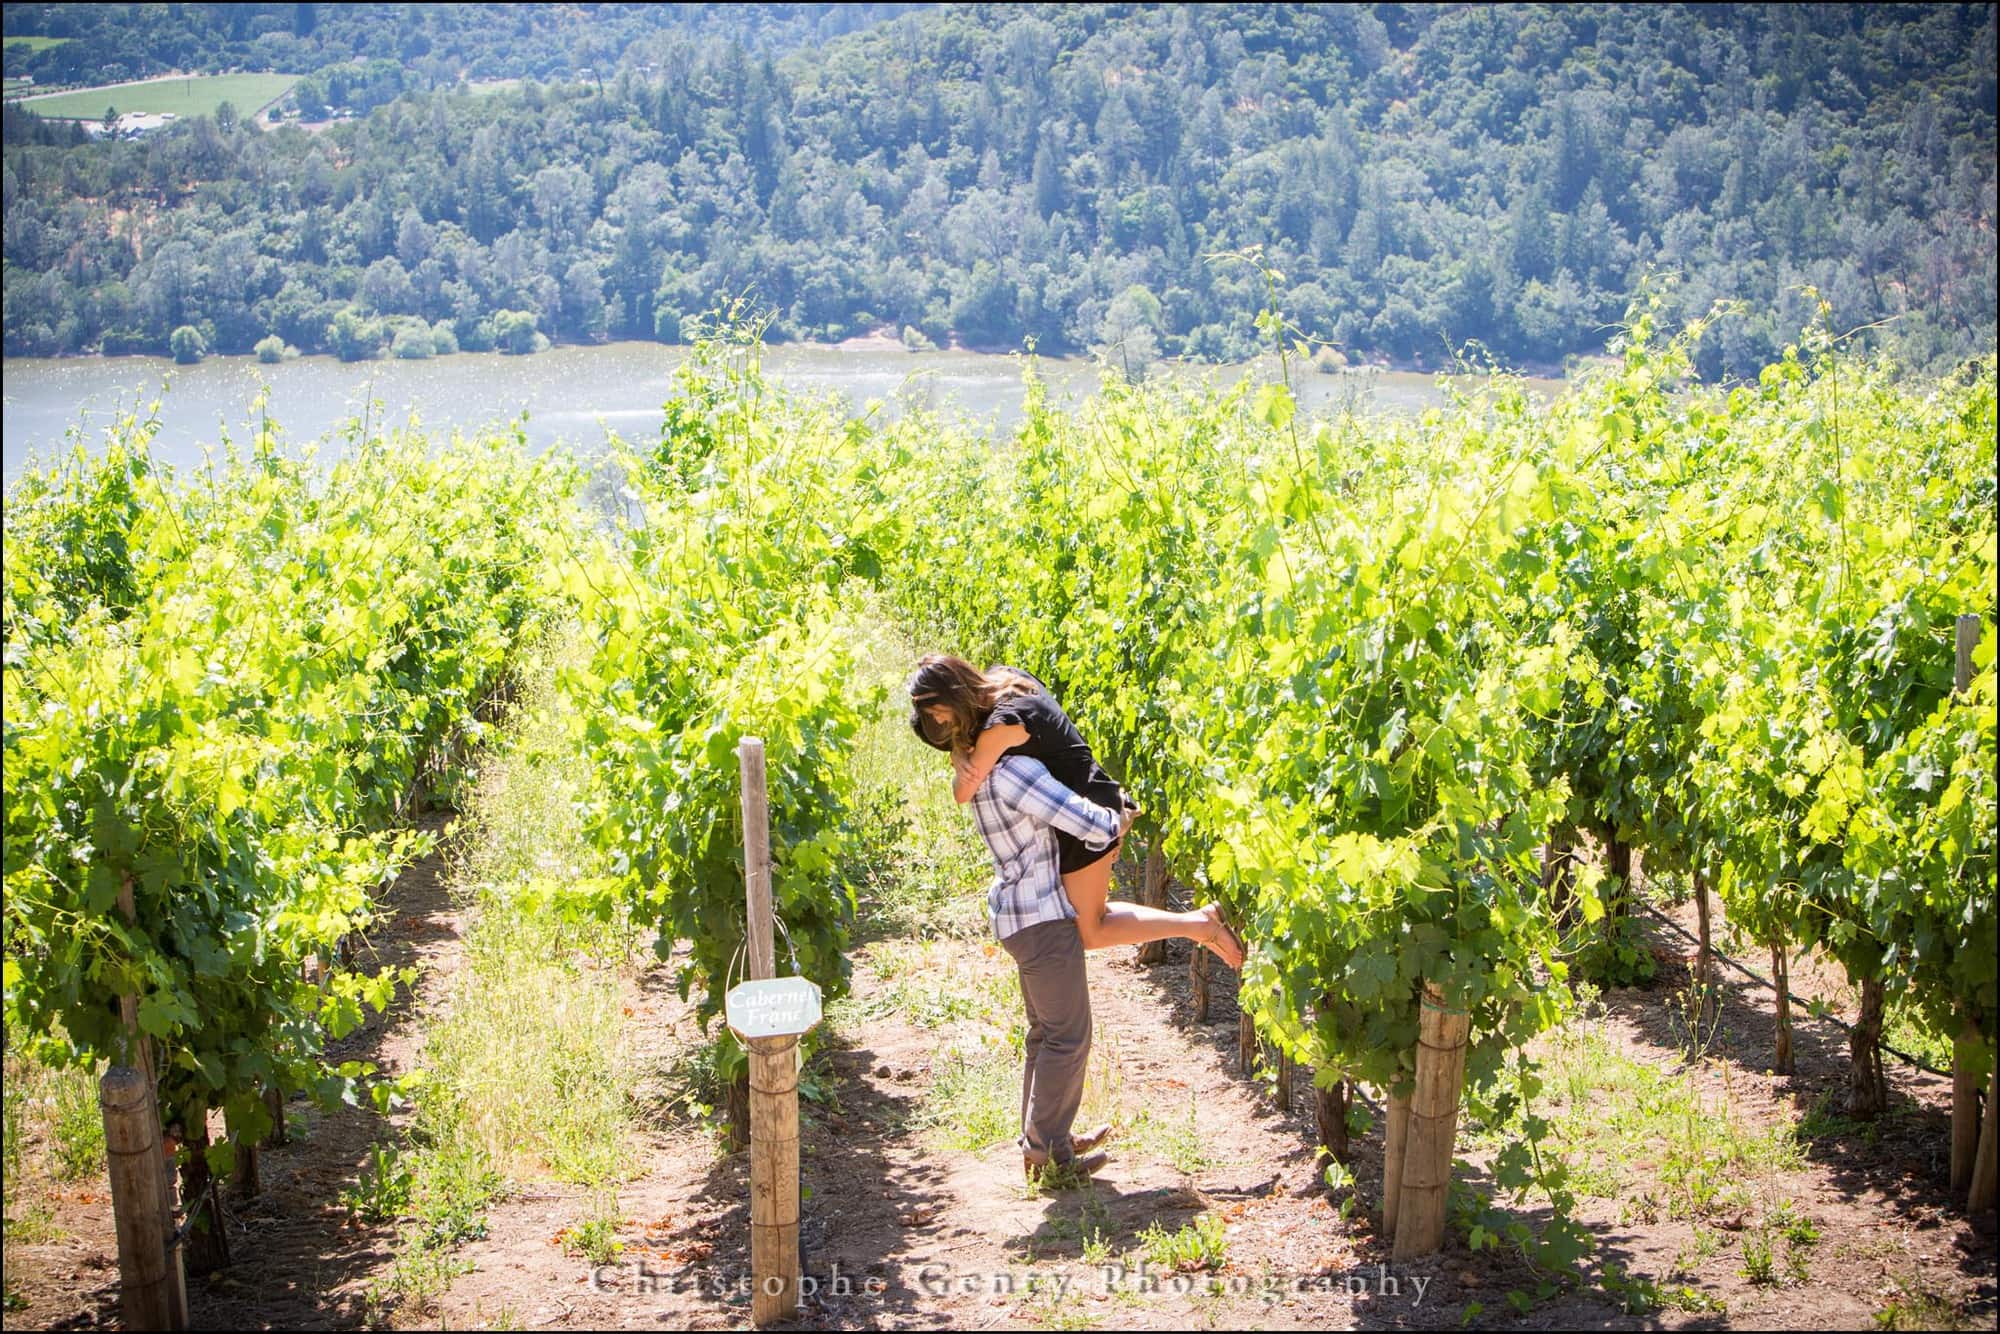 Marriage Proposal Photography in The Napa Valley